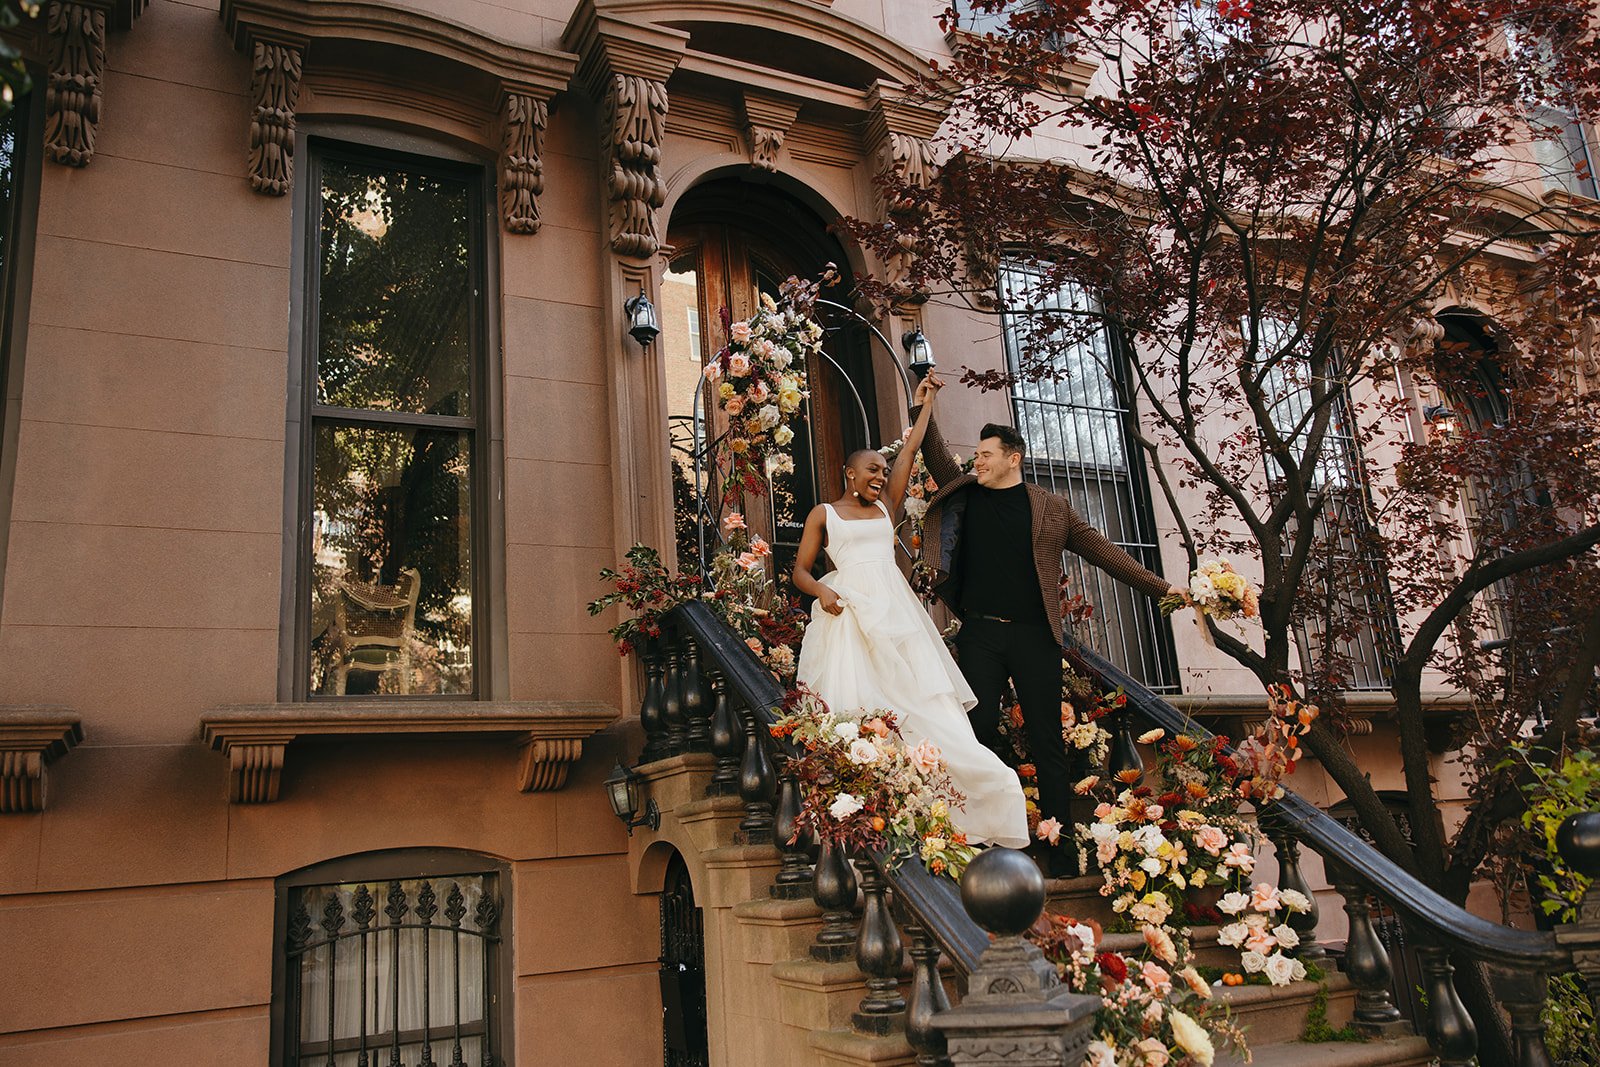 Elopement on the steps of a brownstone in New York City